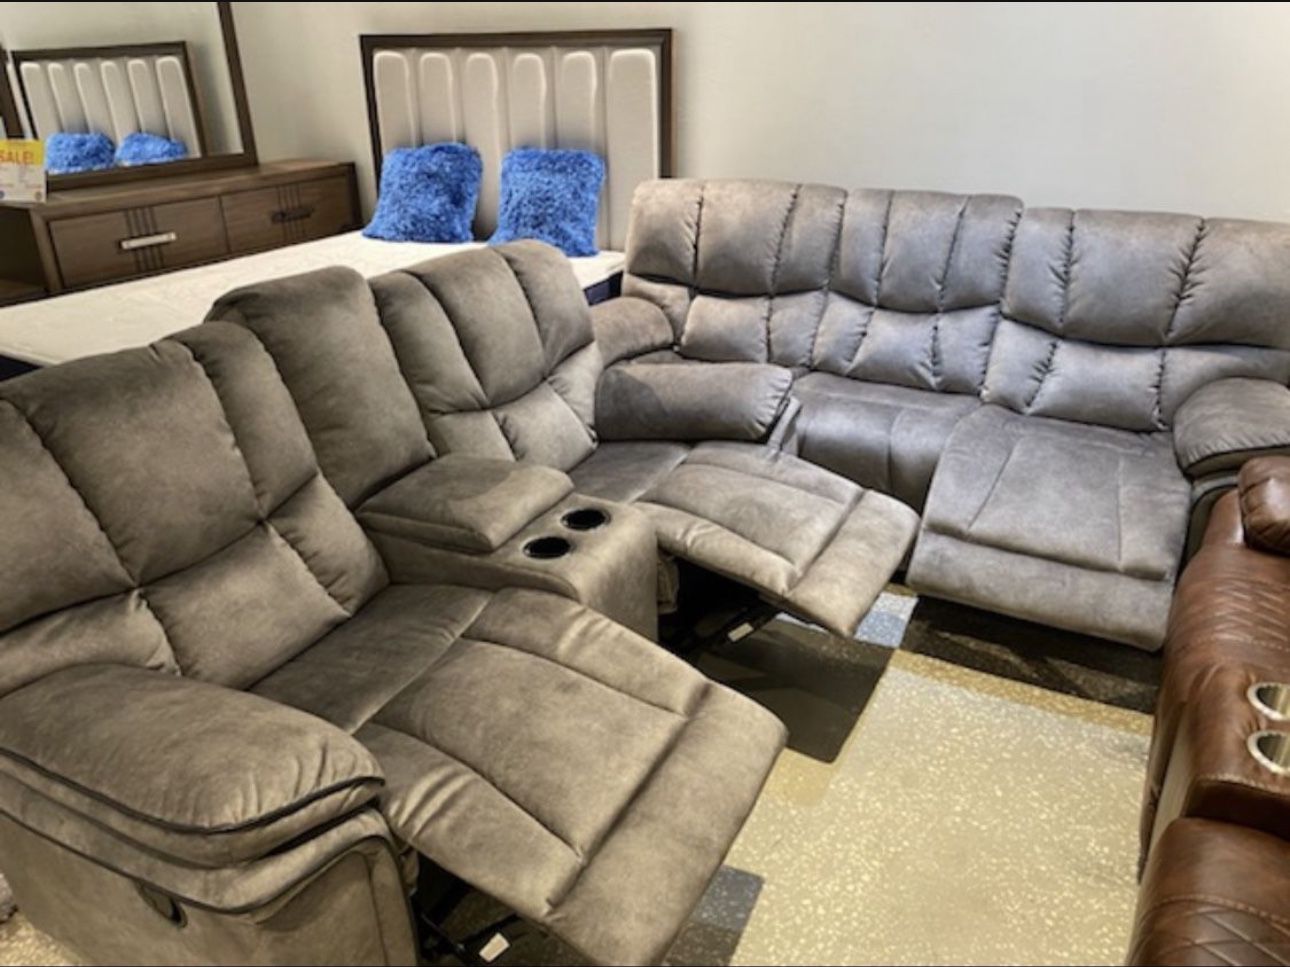 COMFY NEW BARCELONA RECLINING SOFA AND LOVESEAT SET ON SALE ONLY $899. IN STOCK SAME DAY DELIVERY 🚚 EASY FINANCING 